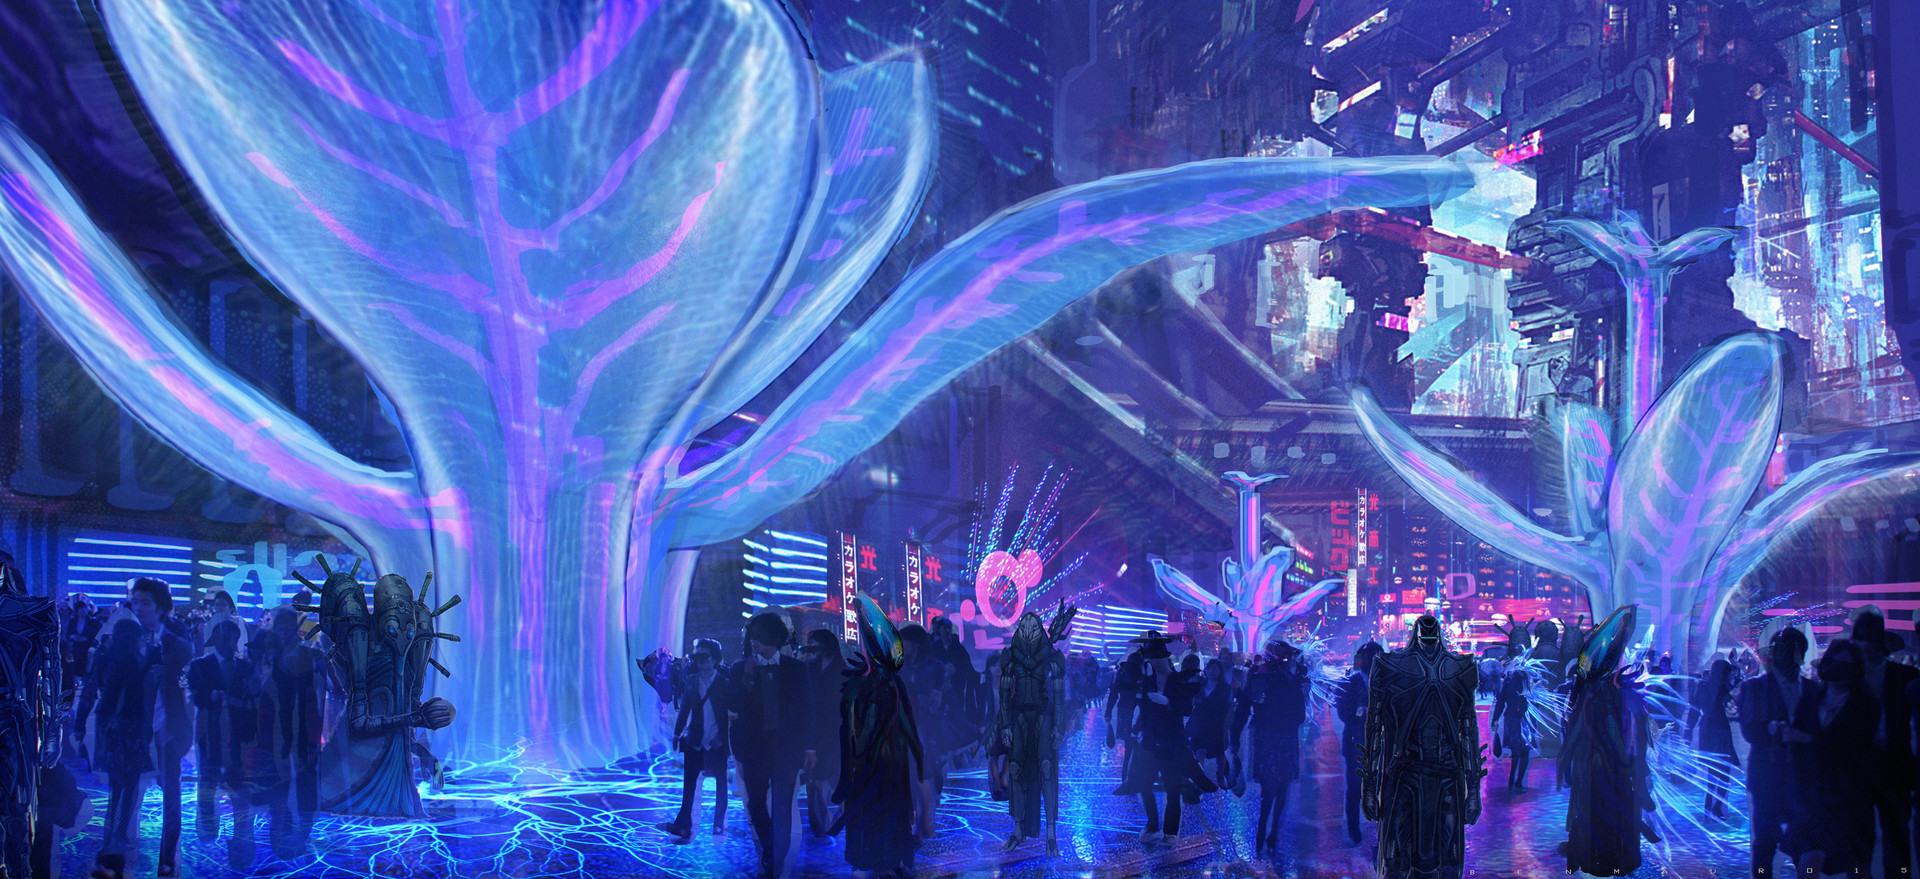 crowds, Ben Mauro, Valerian and the City of a Thousand Planets, Concept cars, Big Market, Aliens, Science fiction, Plants Wallpaper